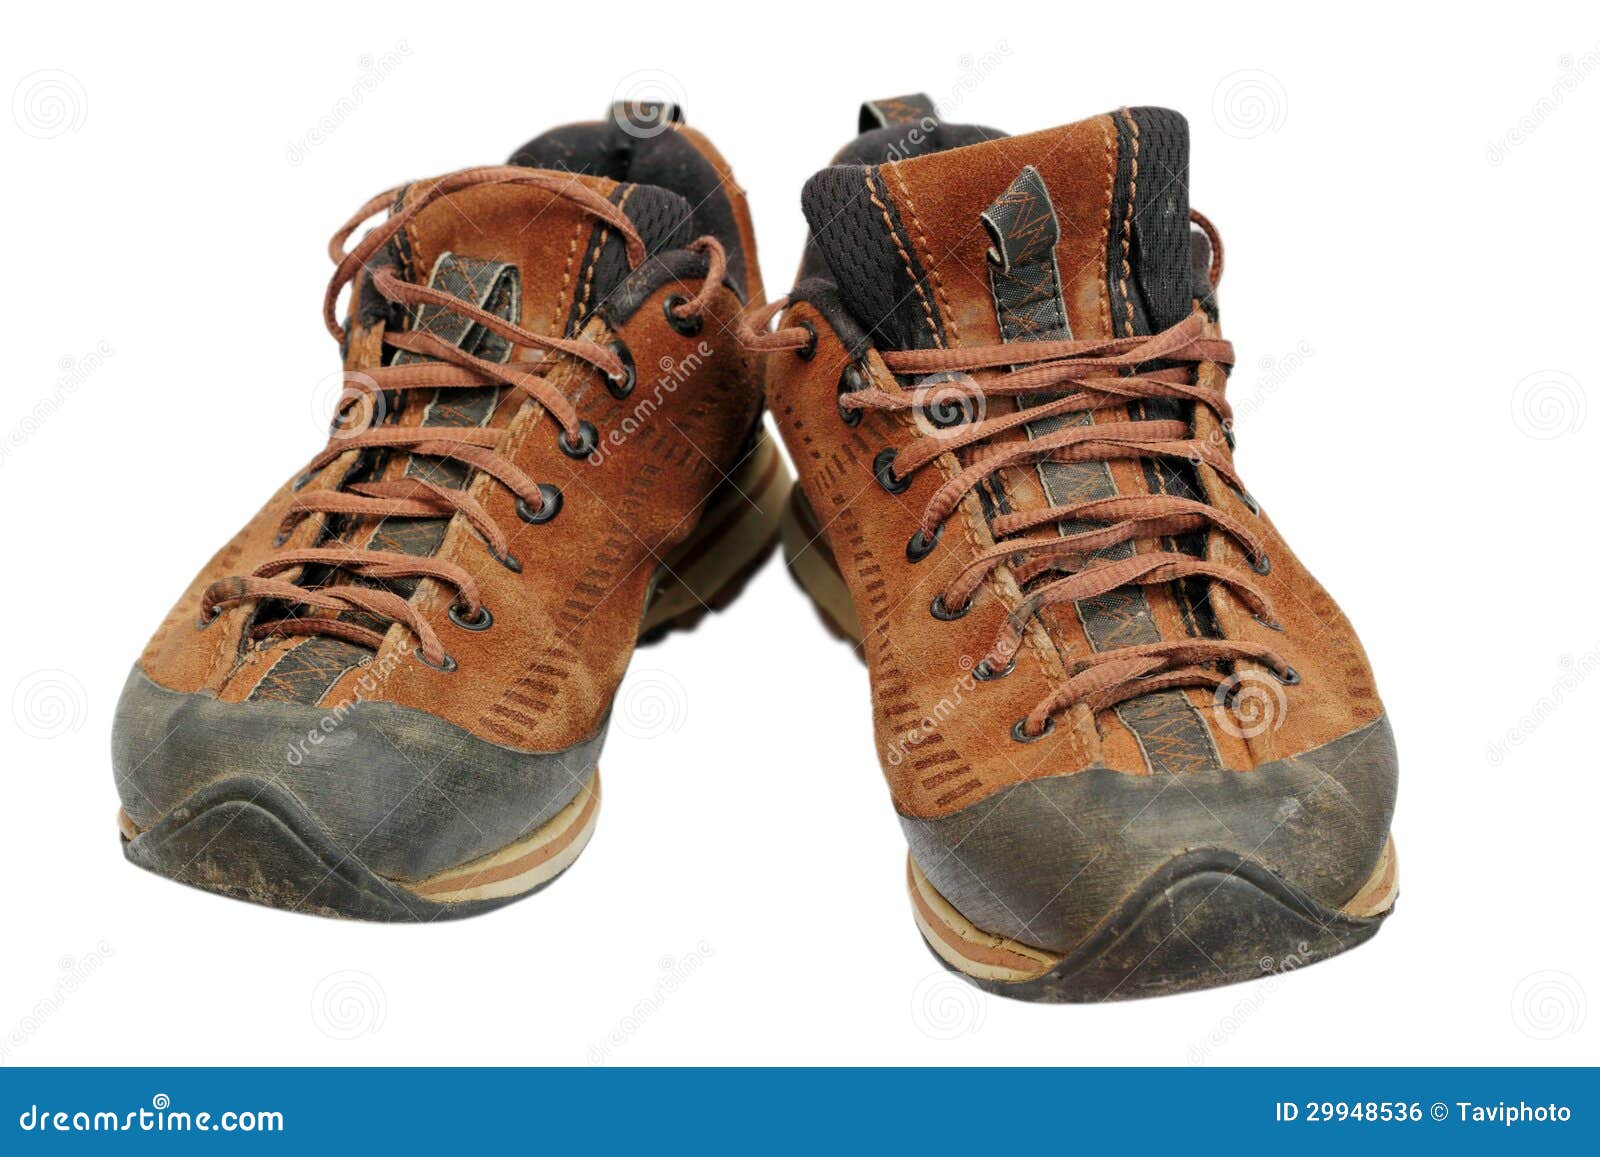 Dirty hiking shoes stock photo. Image of leather, material - 29948536